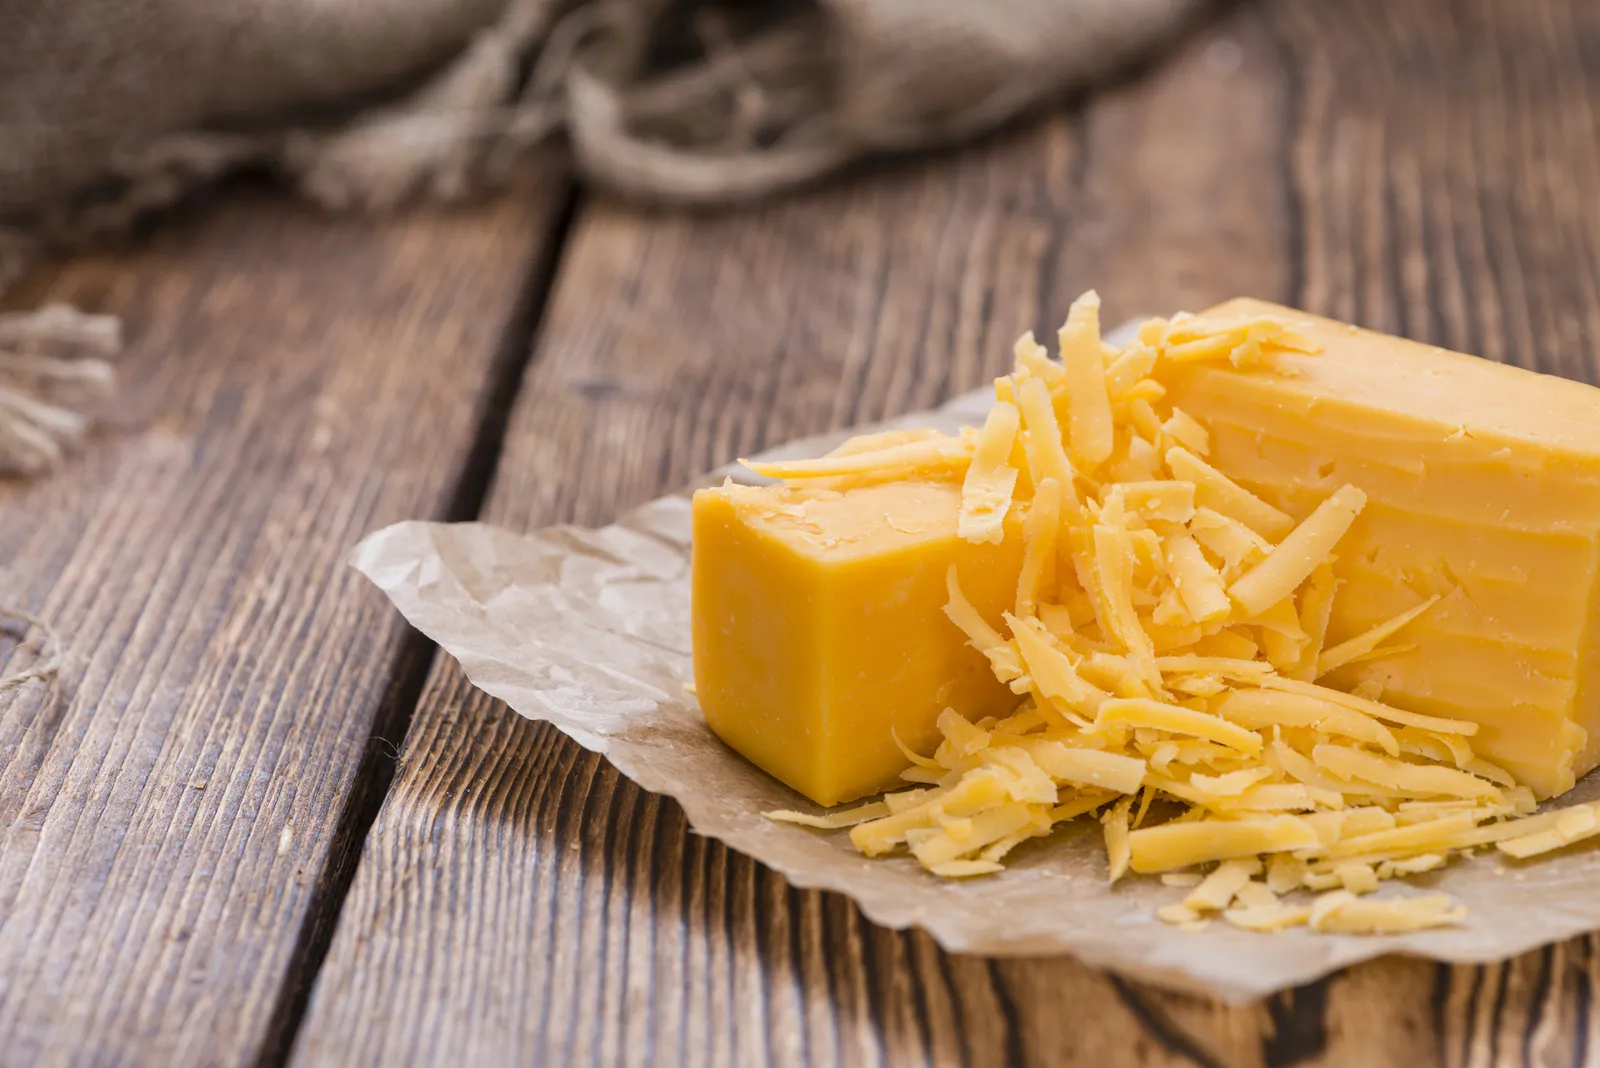 What Makes Cheddar Cheese Taste So Good?, Smart News